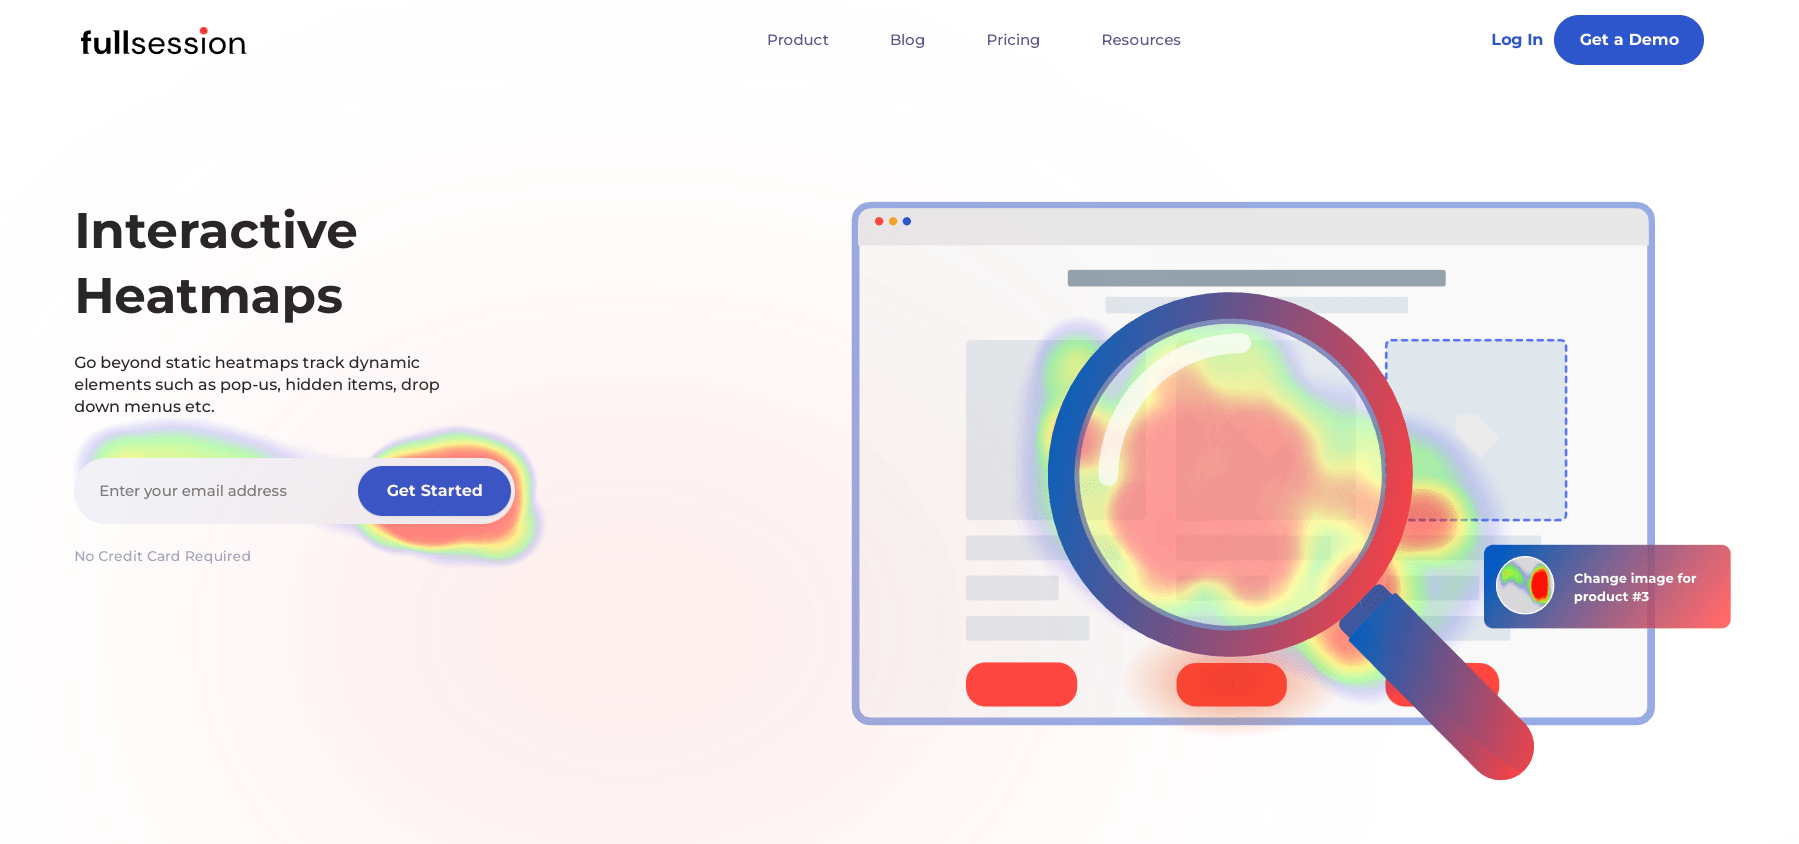 fullsession page about interactive heatmaps